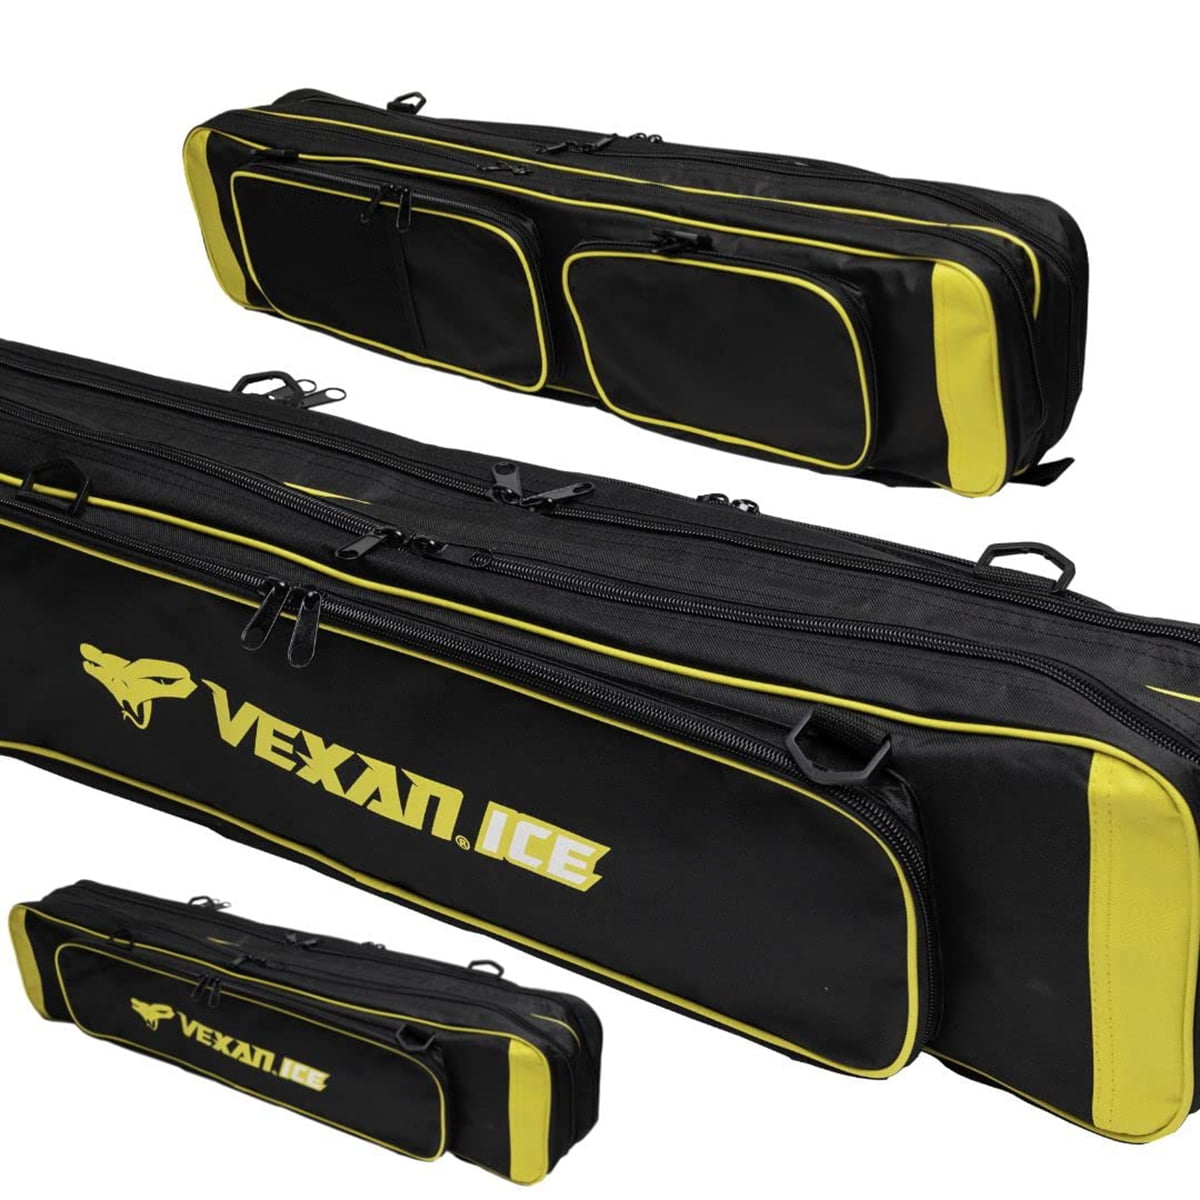 Vexan Ice Fishing Rod & Tackle Bag 36 Soft Case (Yellow